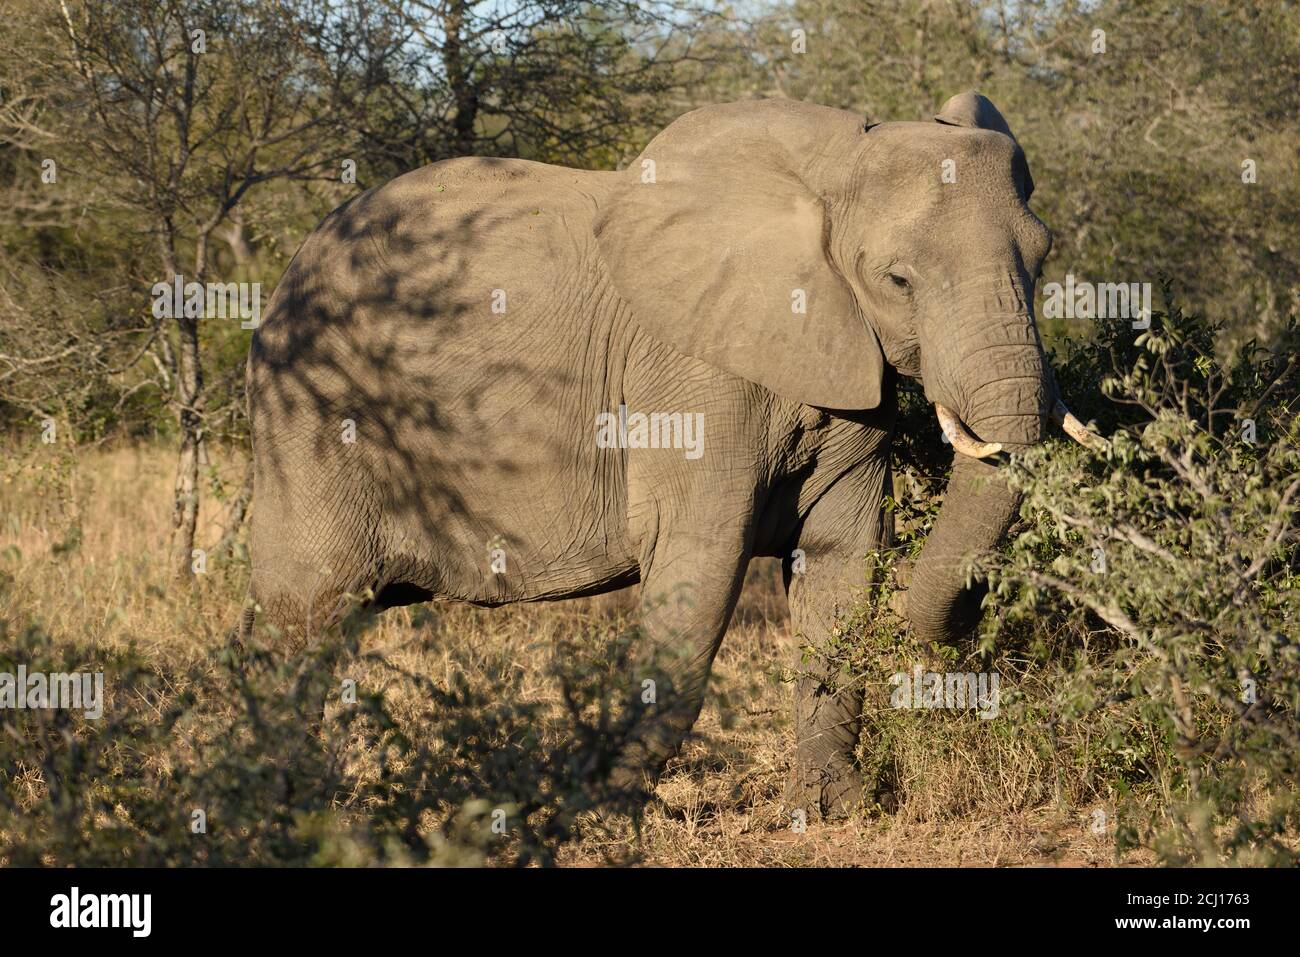 African elephant living in wild in South Africa. Stock Photo